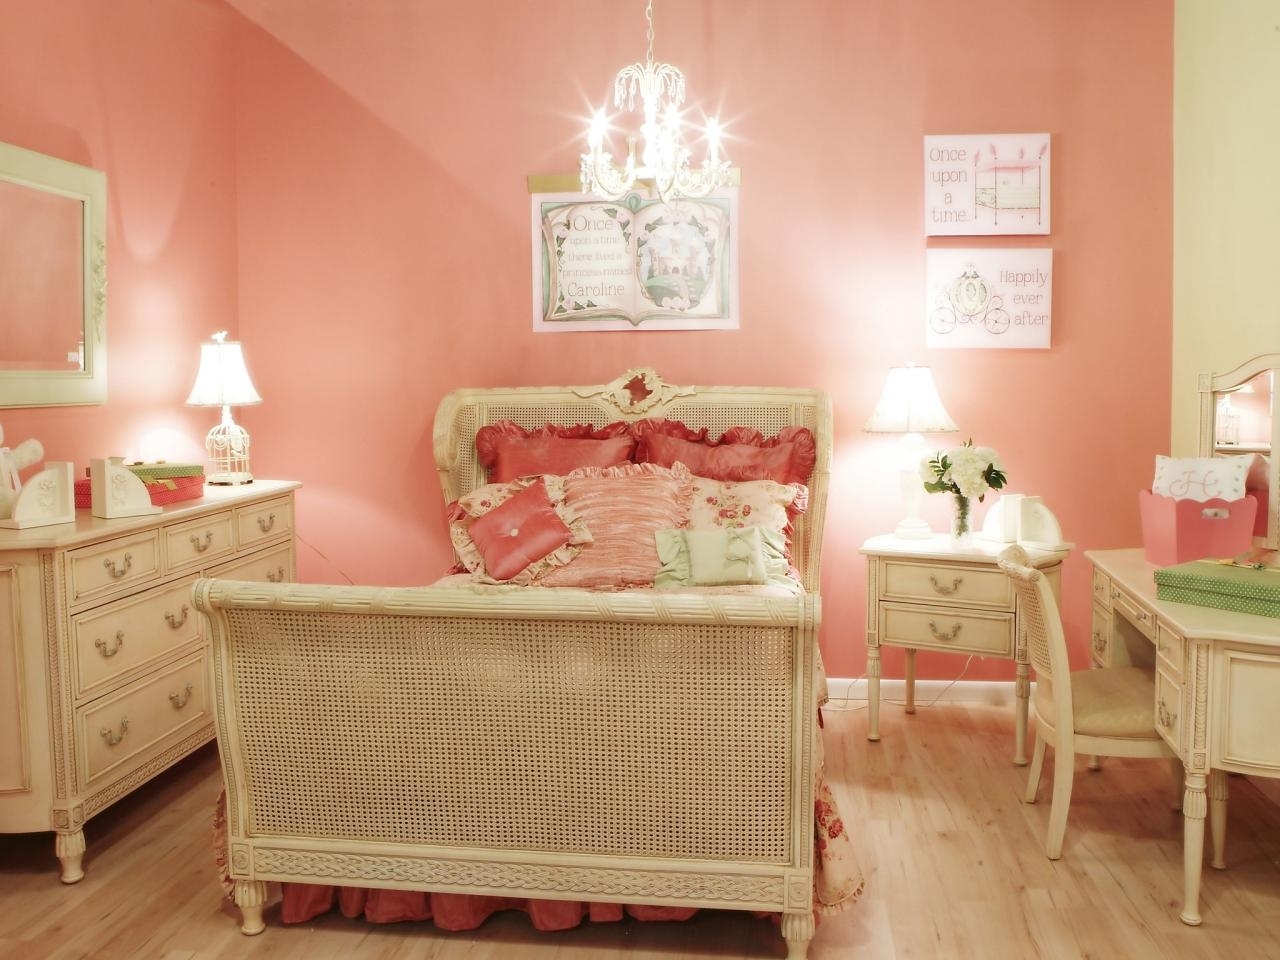 10 Pretty Paint Ideas For Girls Room %name 2022